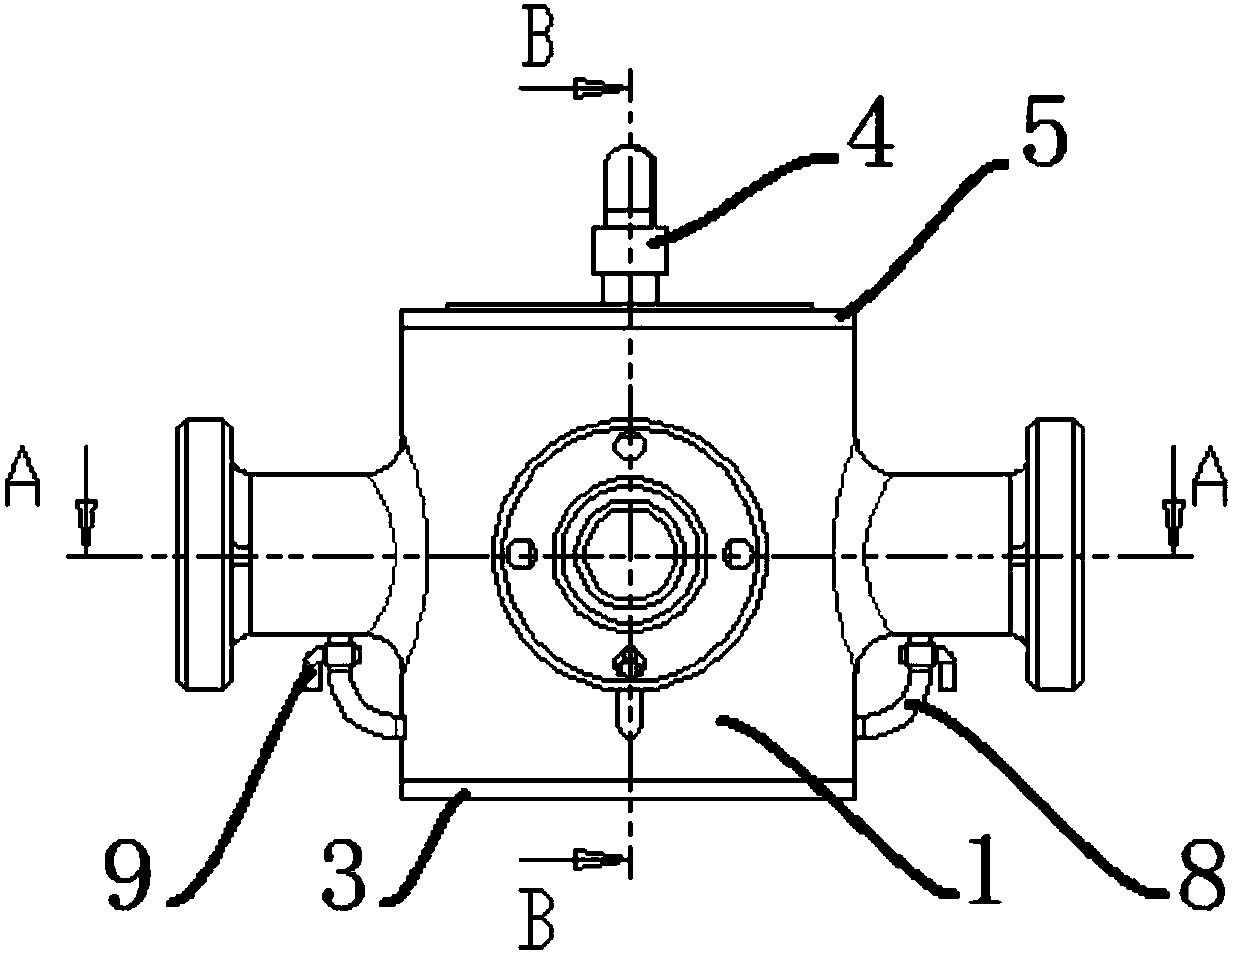 Four-channel reversing and automatic throttling plunger valve